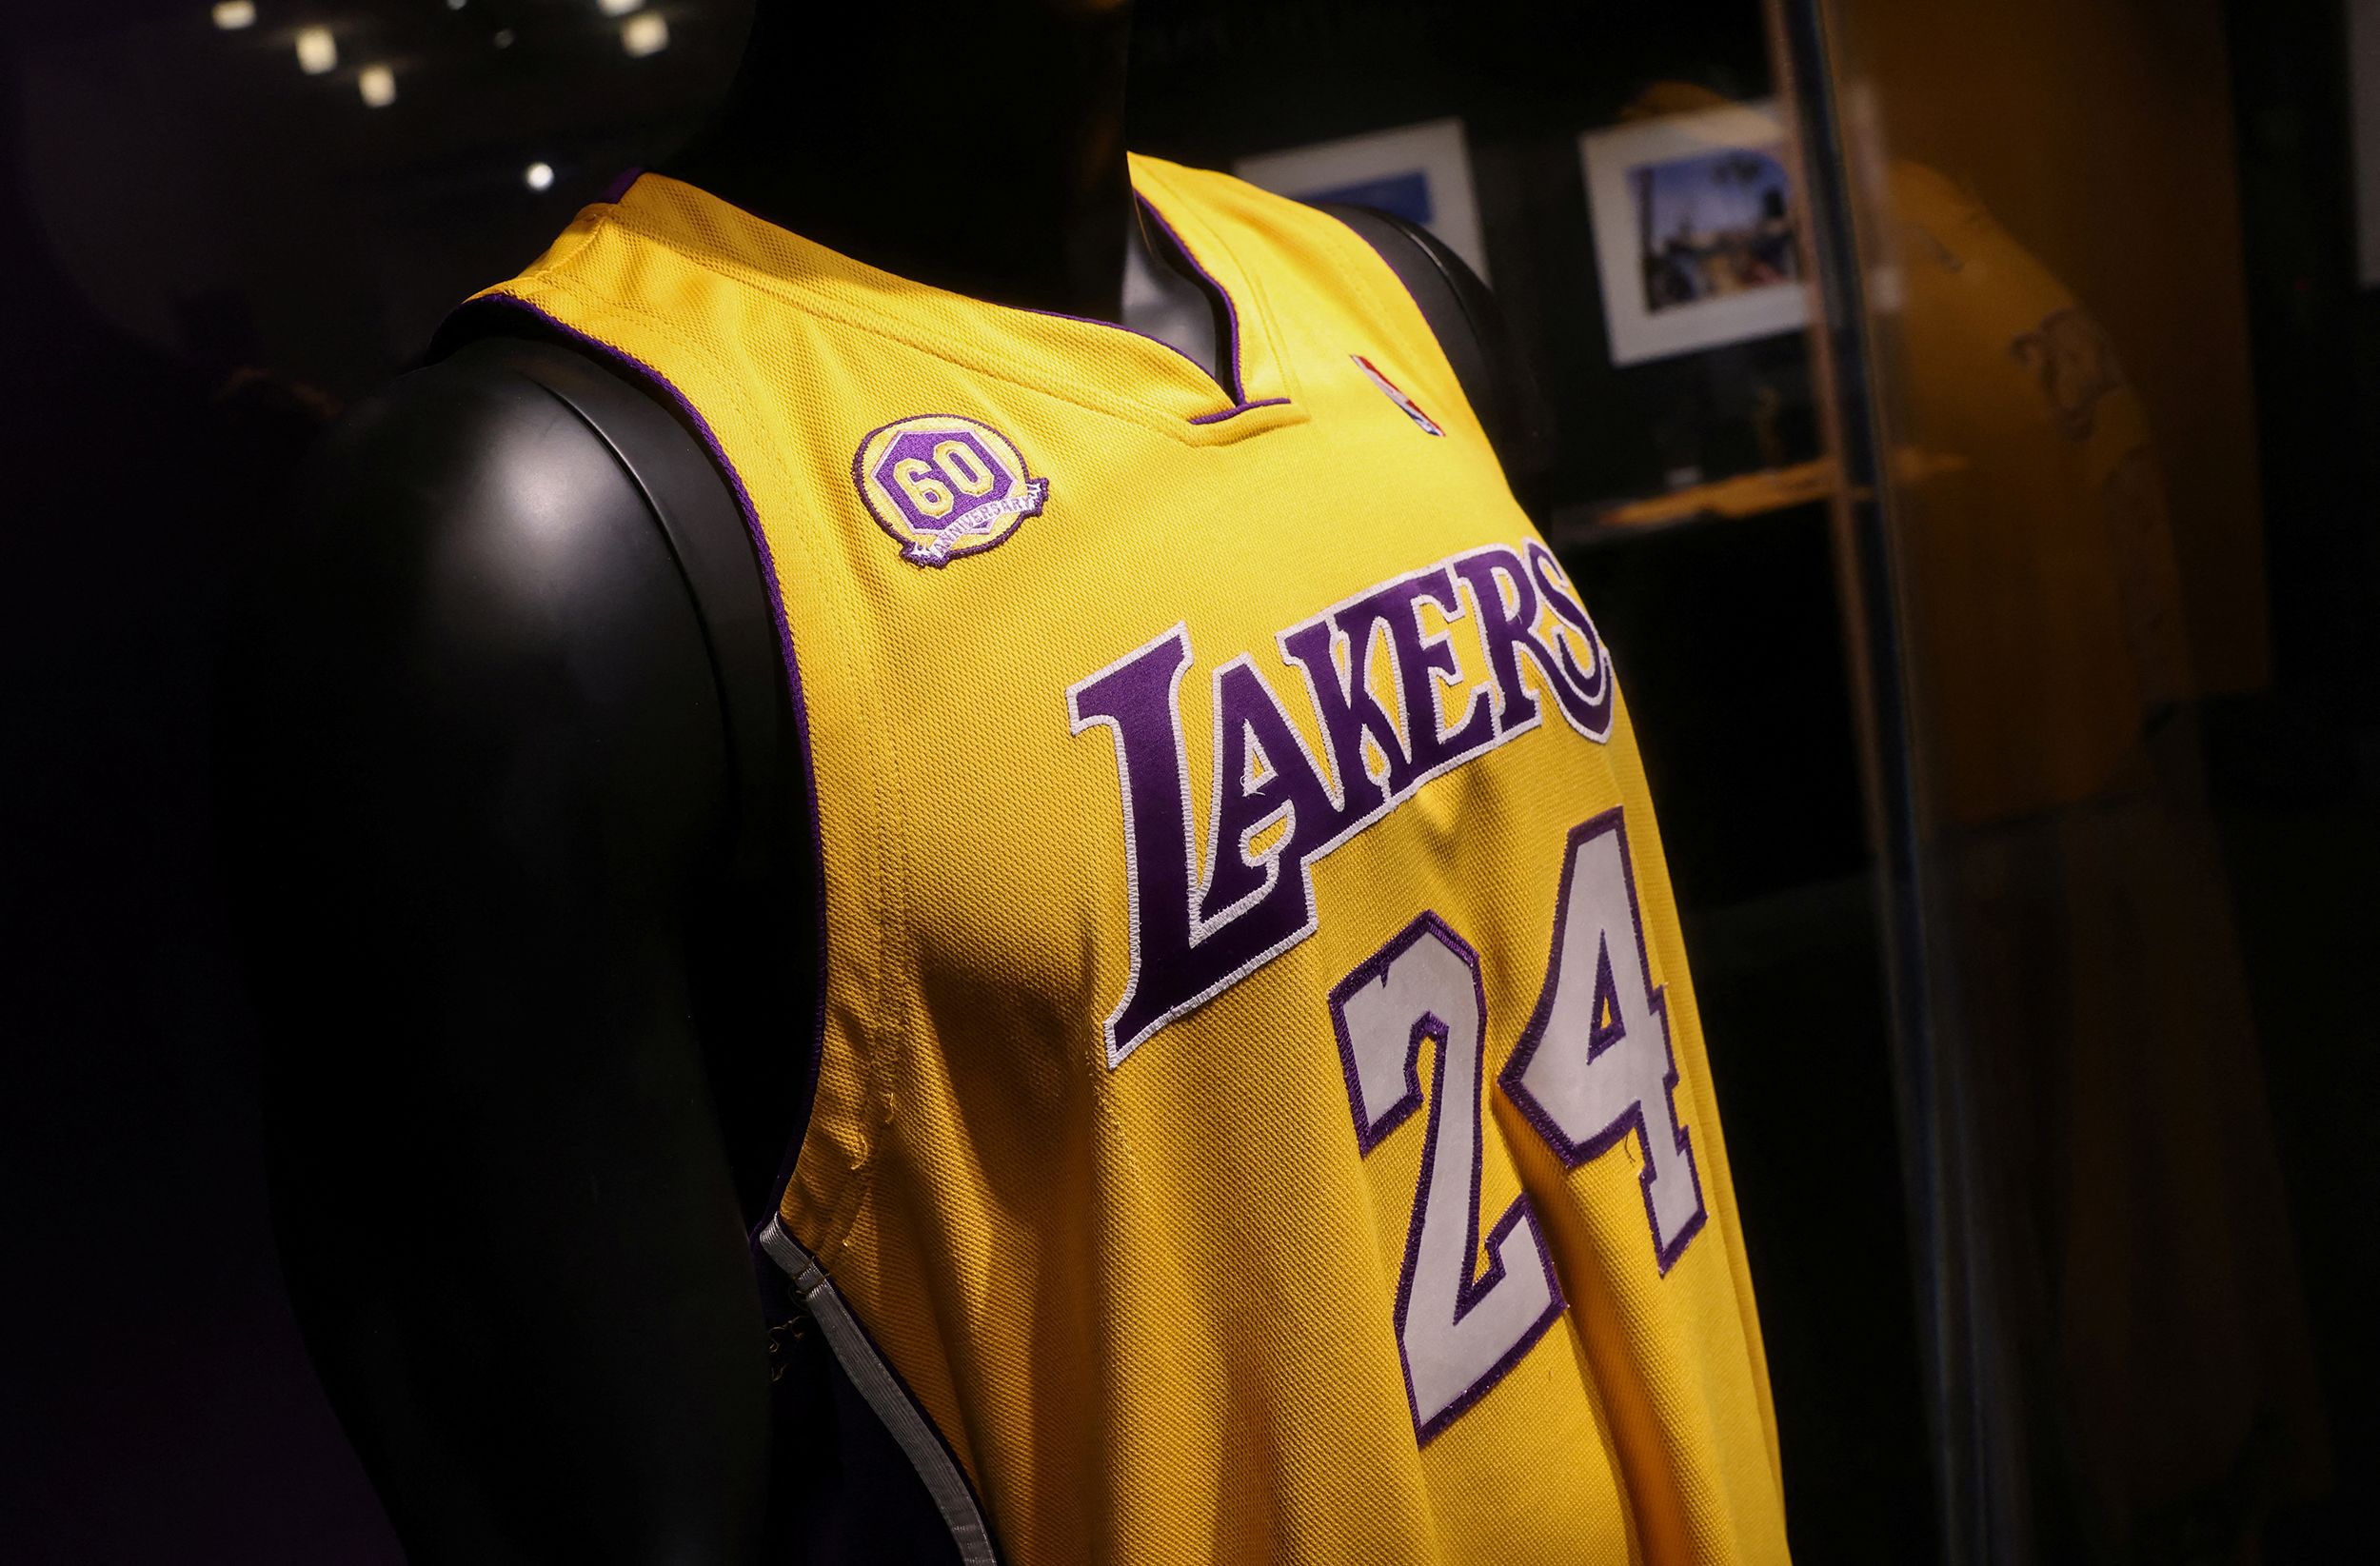 kobe bryant jersey special edition